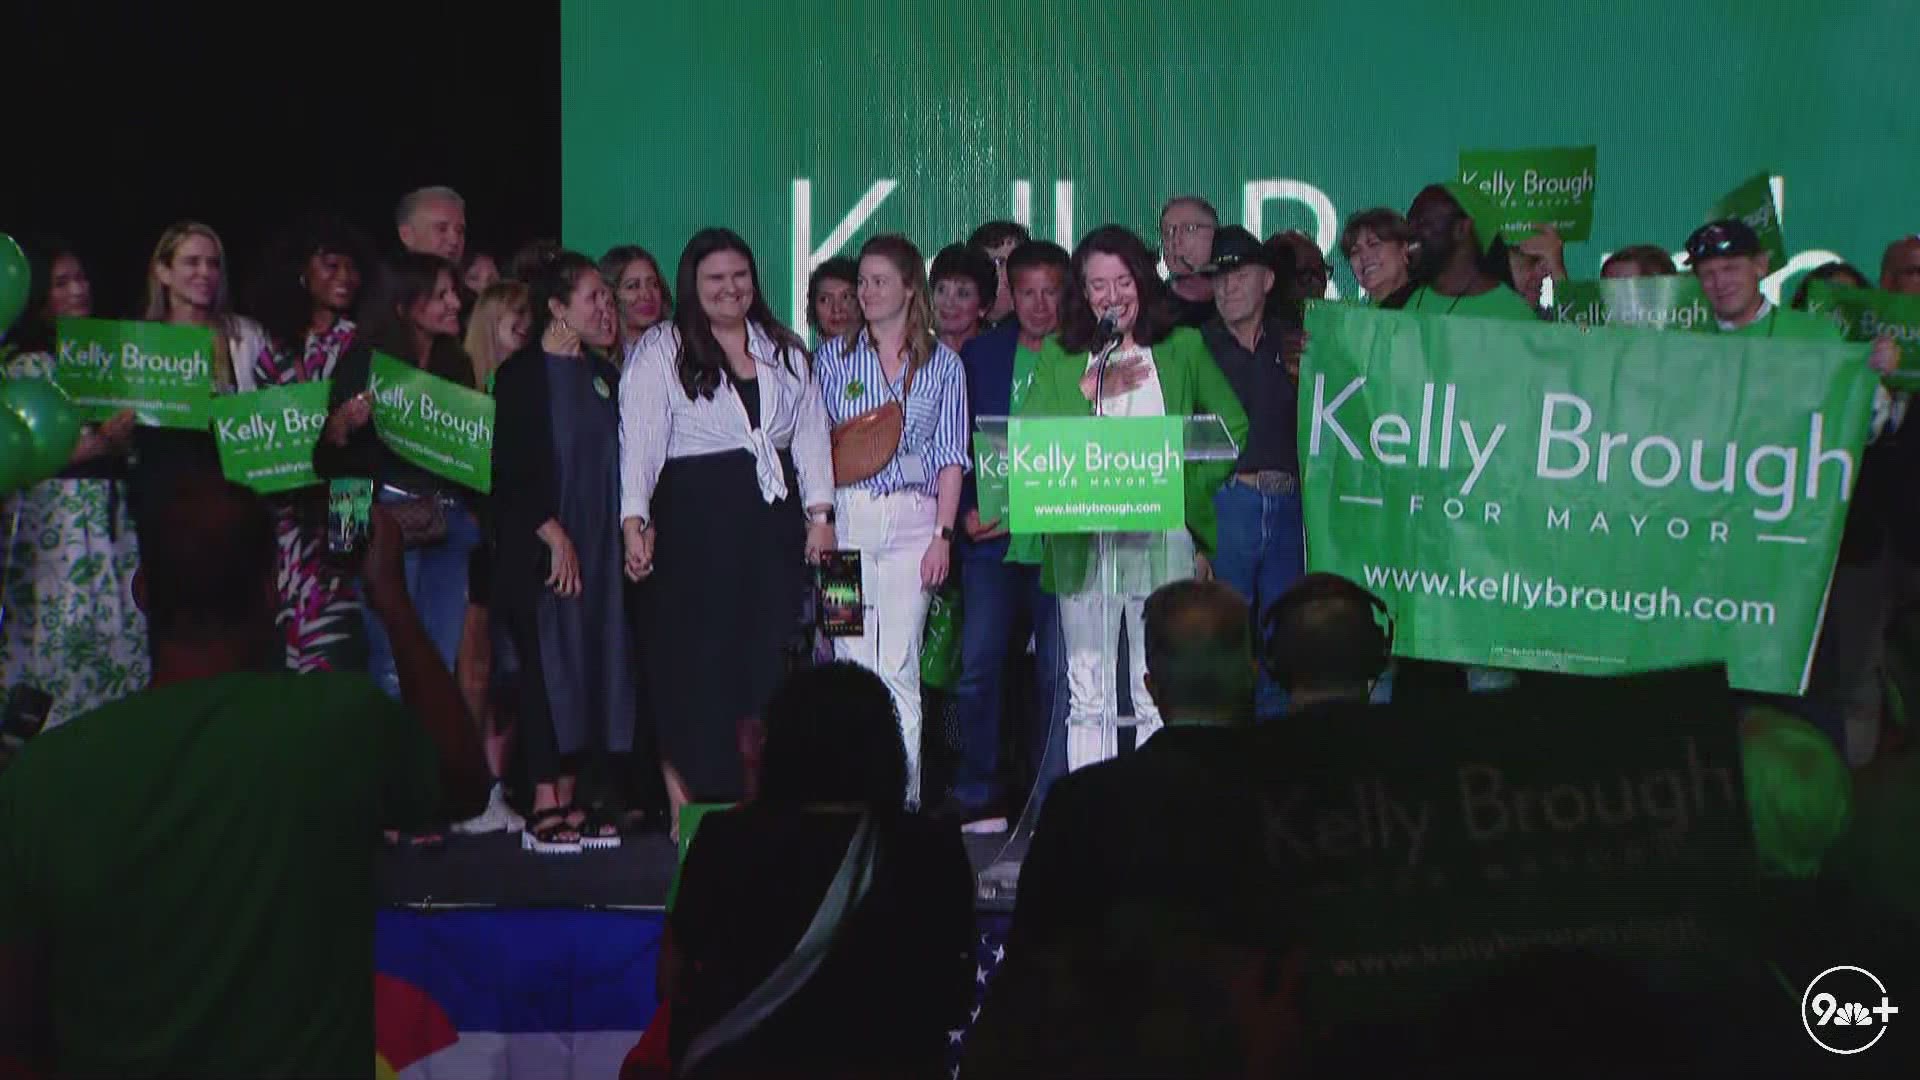 Mike Johnston was leading Kelly Brough by about 9% in the Denver mayor's race runoff election as of 10 p.m. Tuesday night.